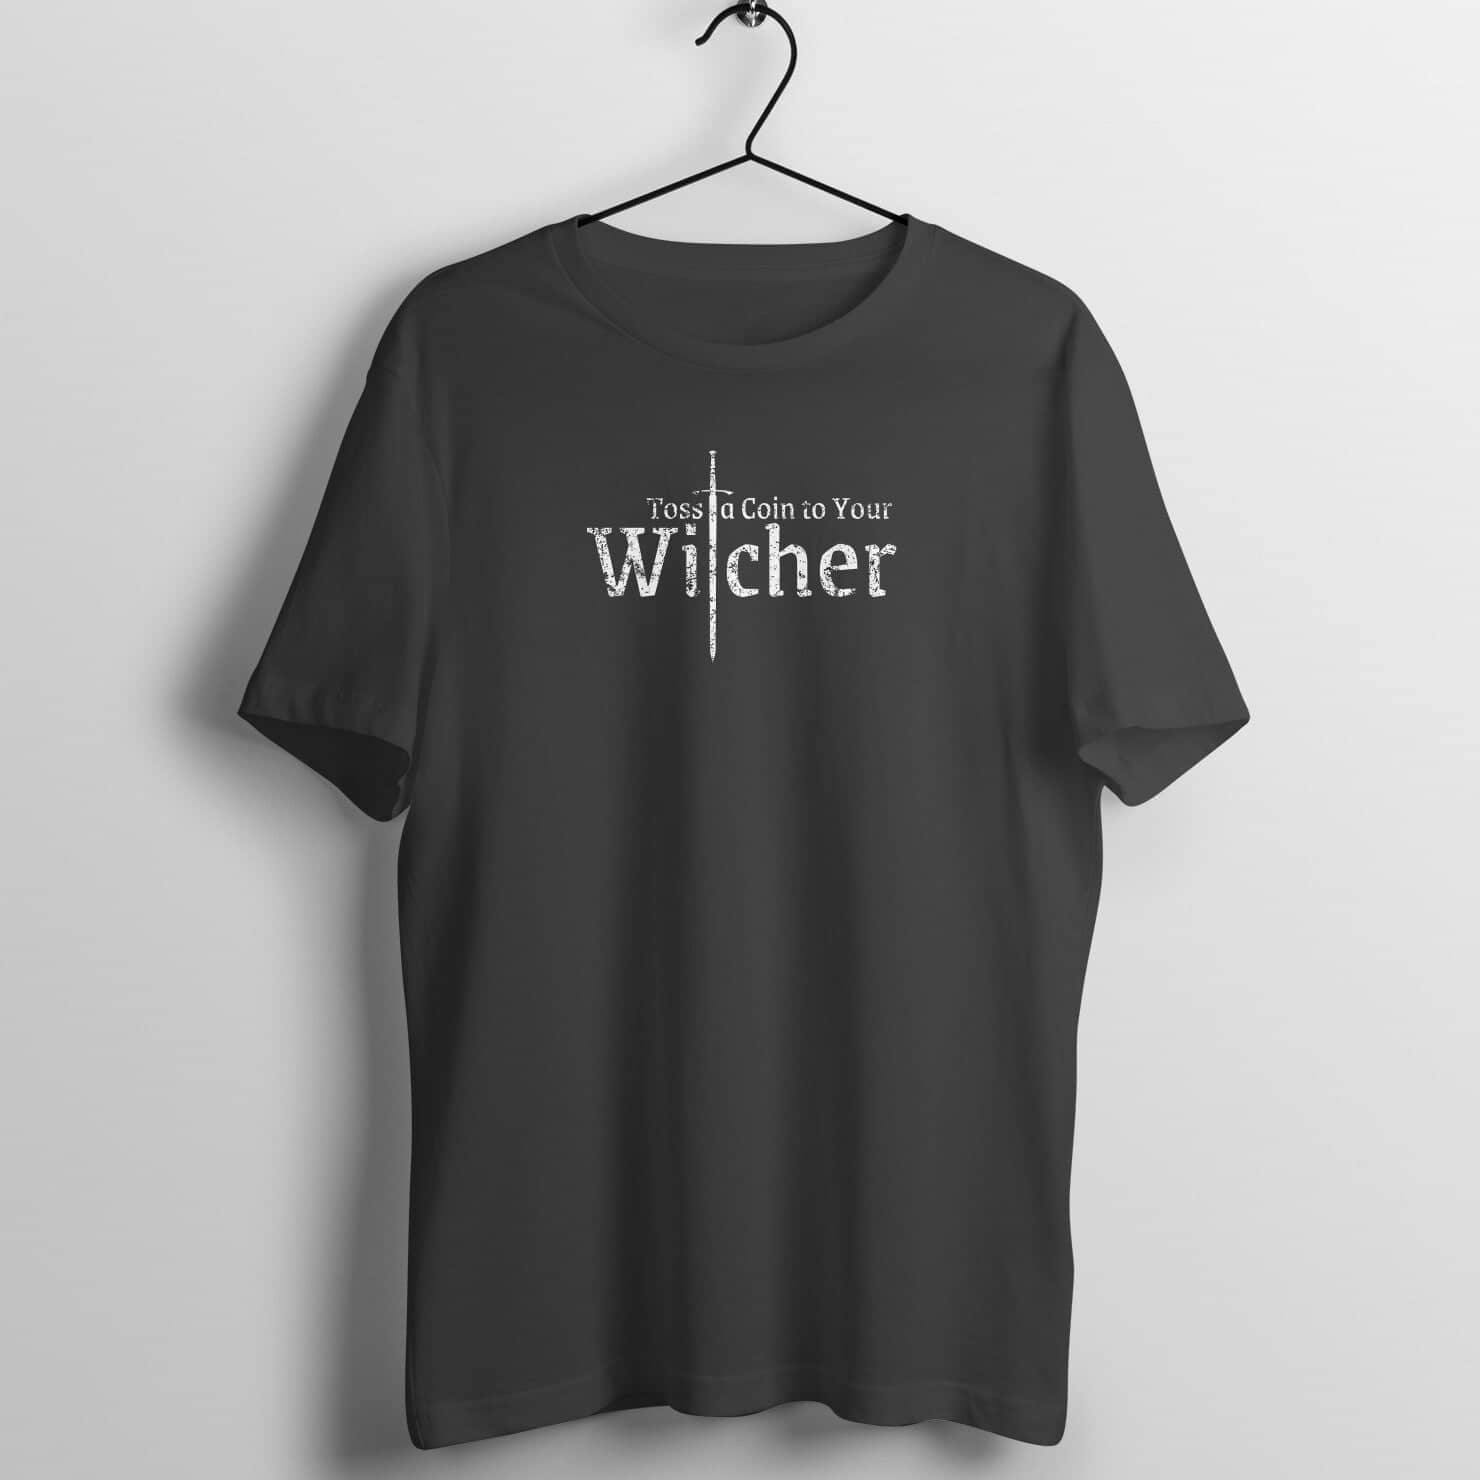 Toss A Coin to your Witcher Exclusive Witcher T Shirt for Men and Women freeshipping - Catch My Drift India